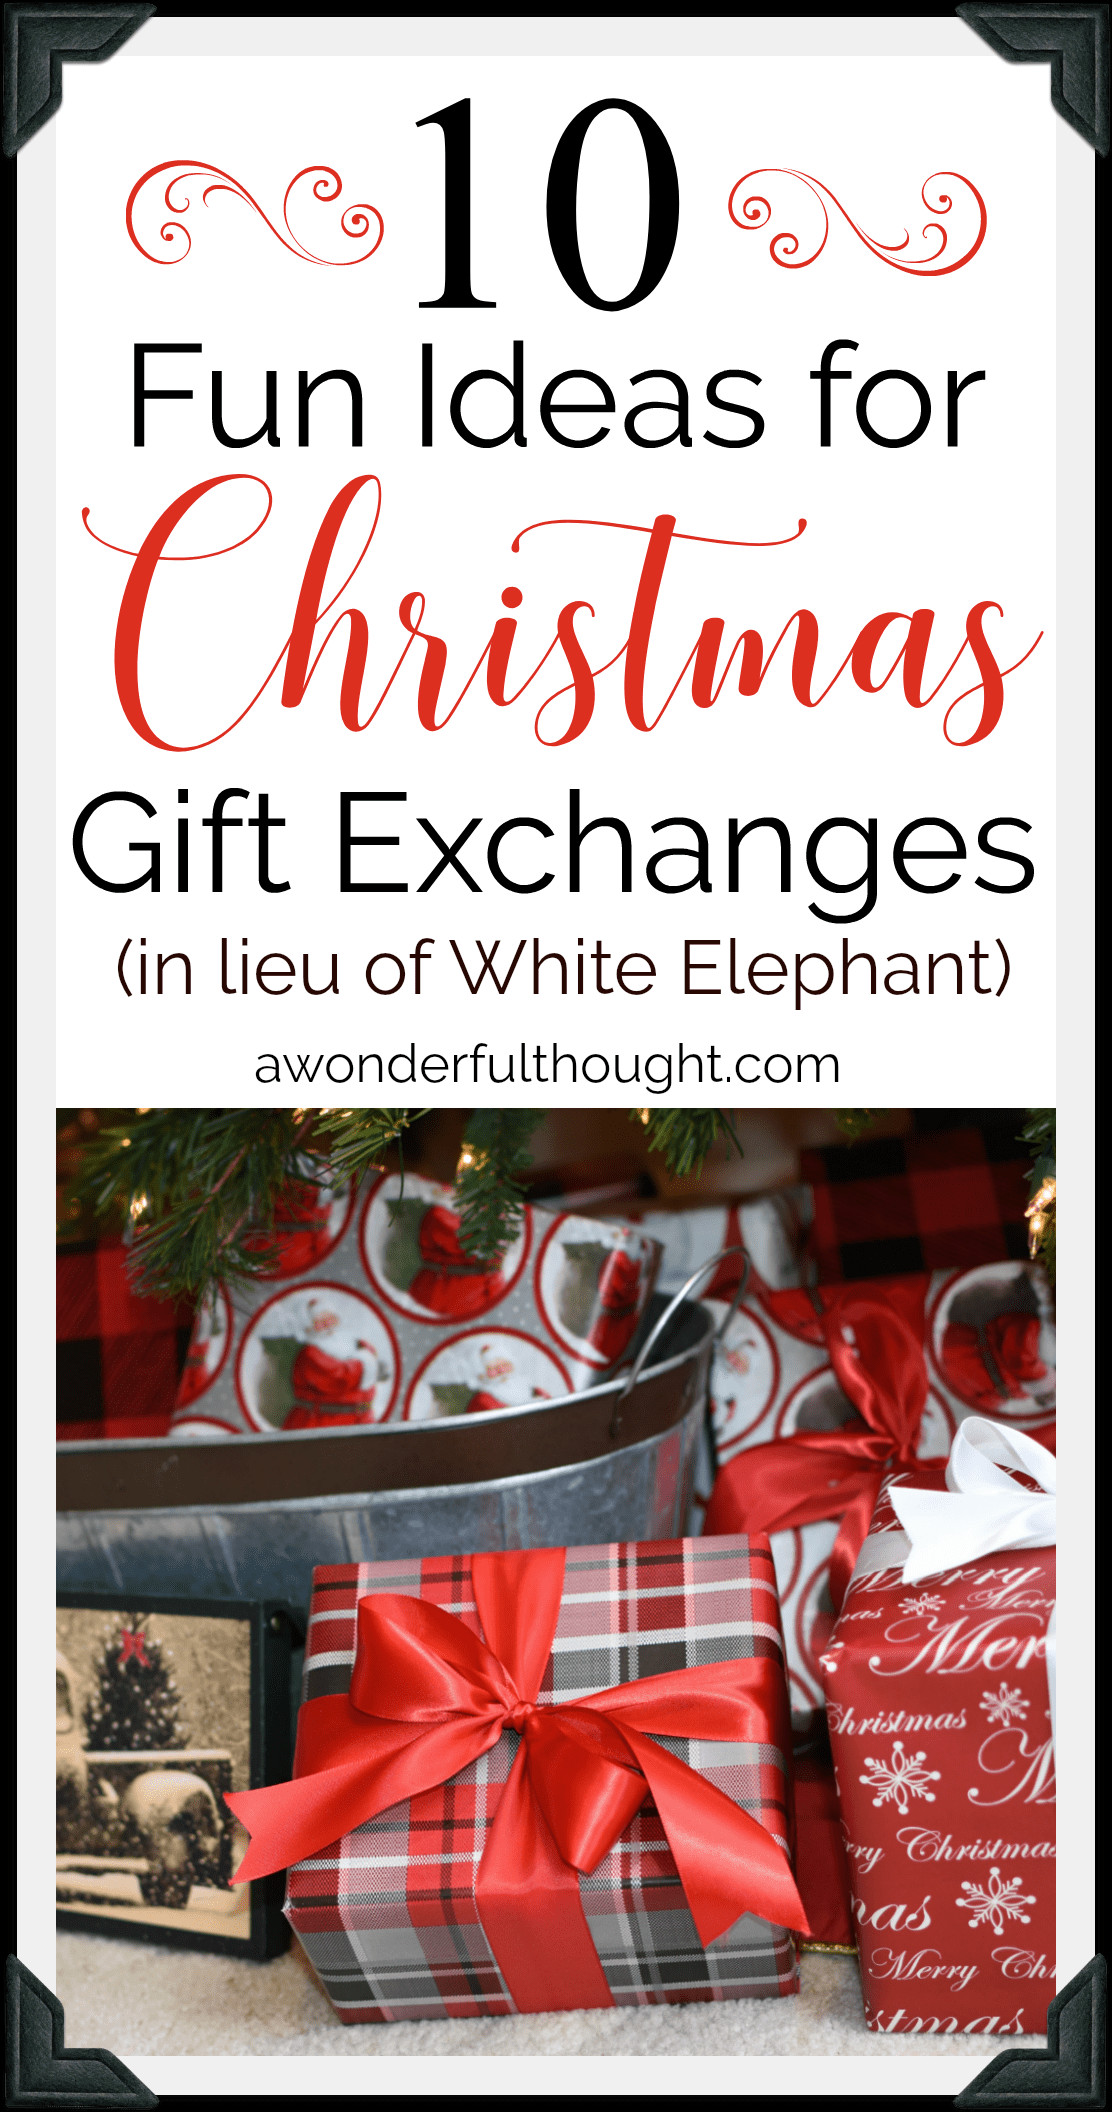 Christmas Party Gifts Exchange Ideas
 Christmas Gift Exchange Ideas A Wonderful Thought